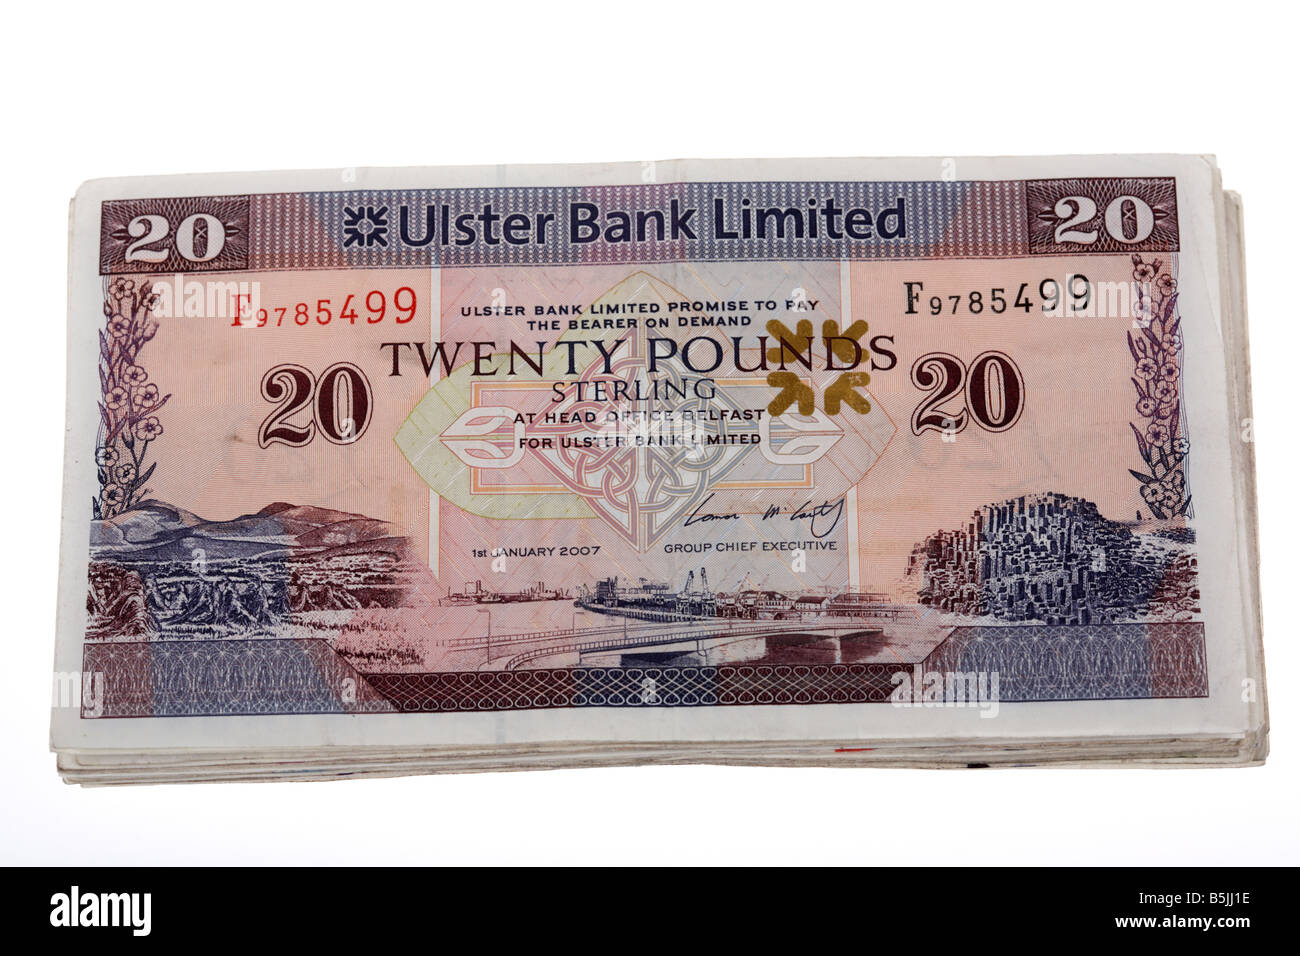 pile 20 pounds sterling northern ireland issued ulster bank notes cash Stock Photo